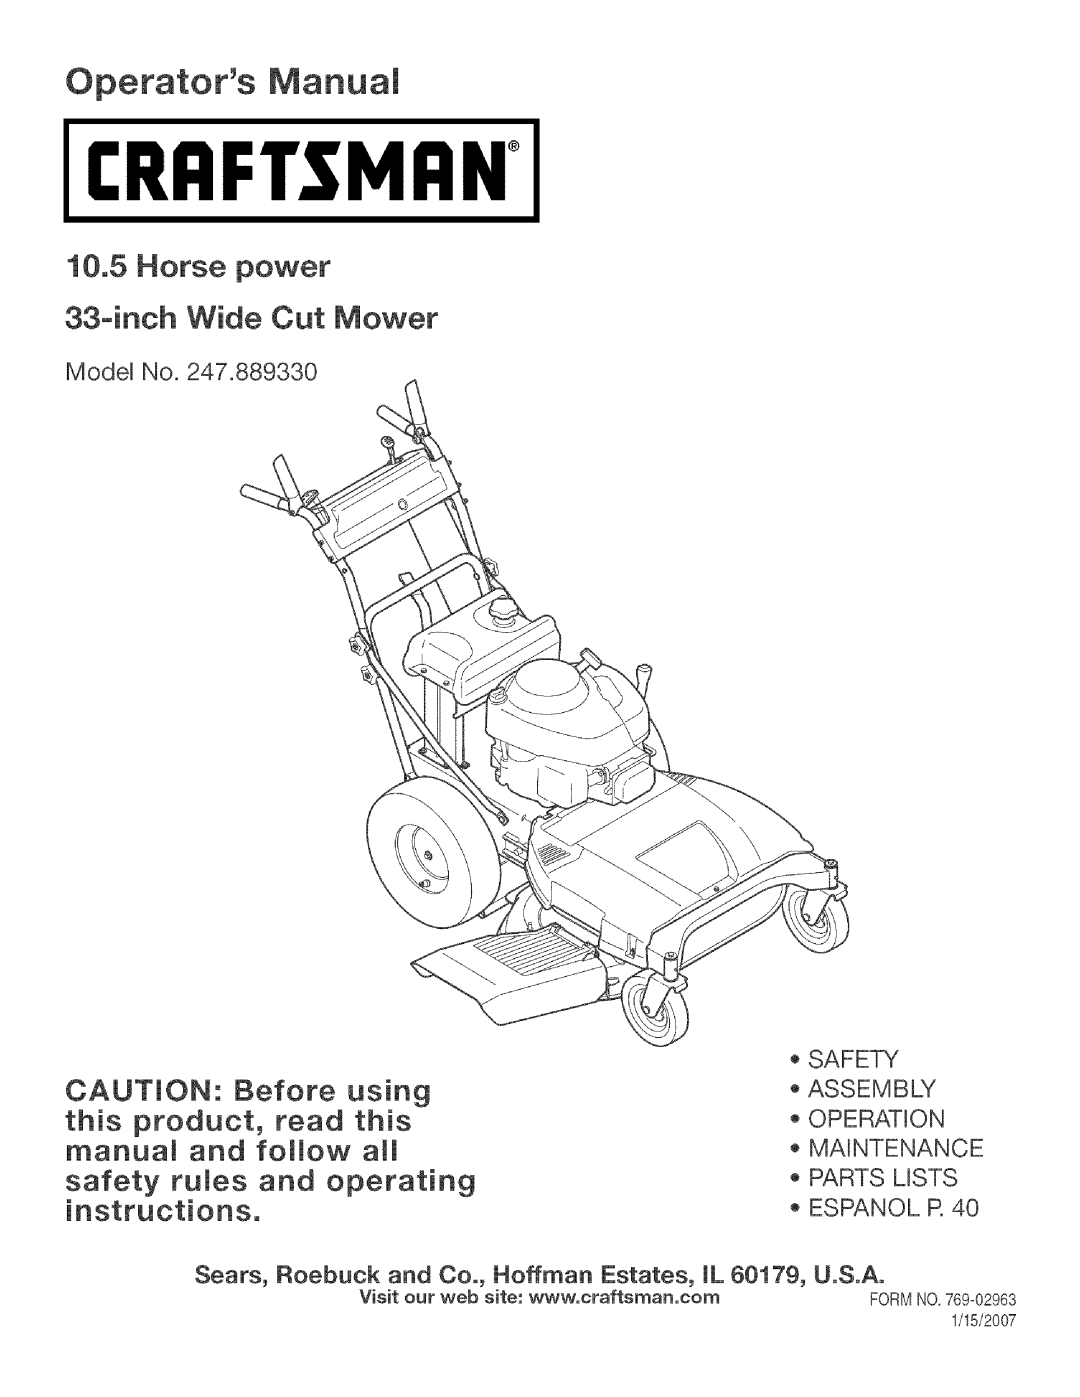 Craftsman 247.88933 manual Operators Manuam, Horse power 33-inch Wide Cut Mower, safety fumes and operating, Model No 